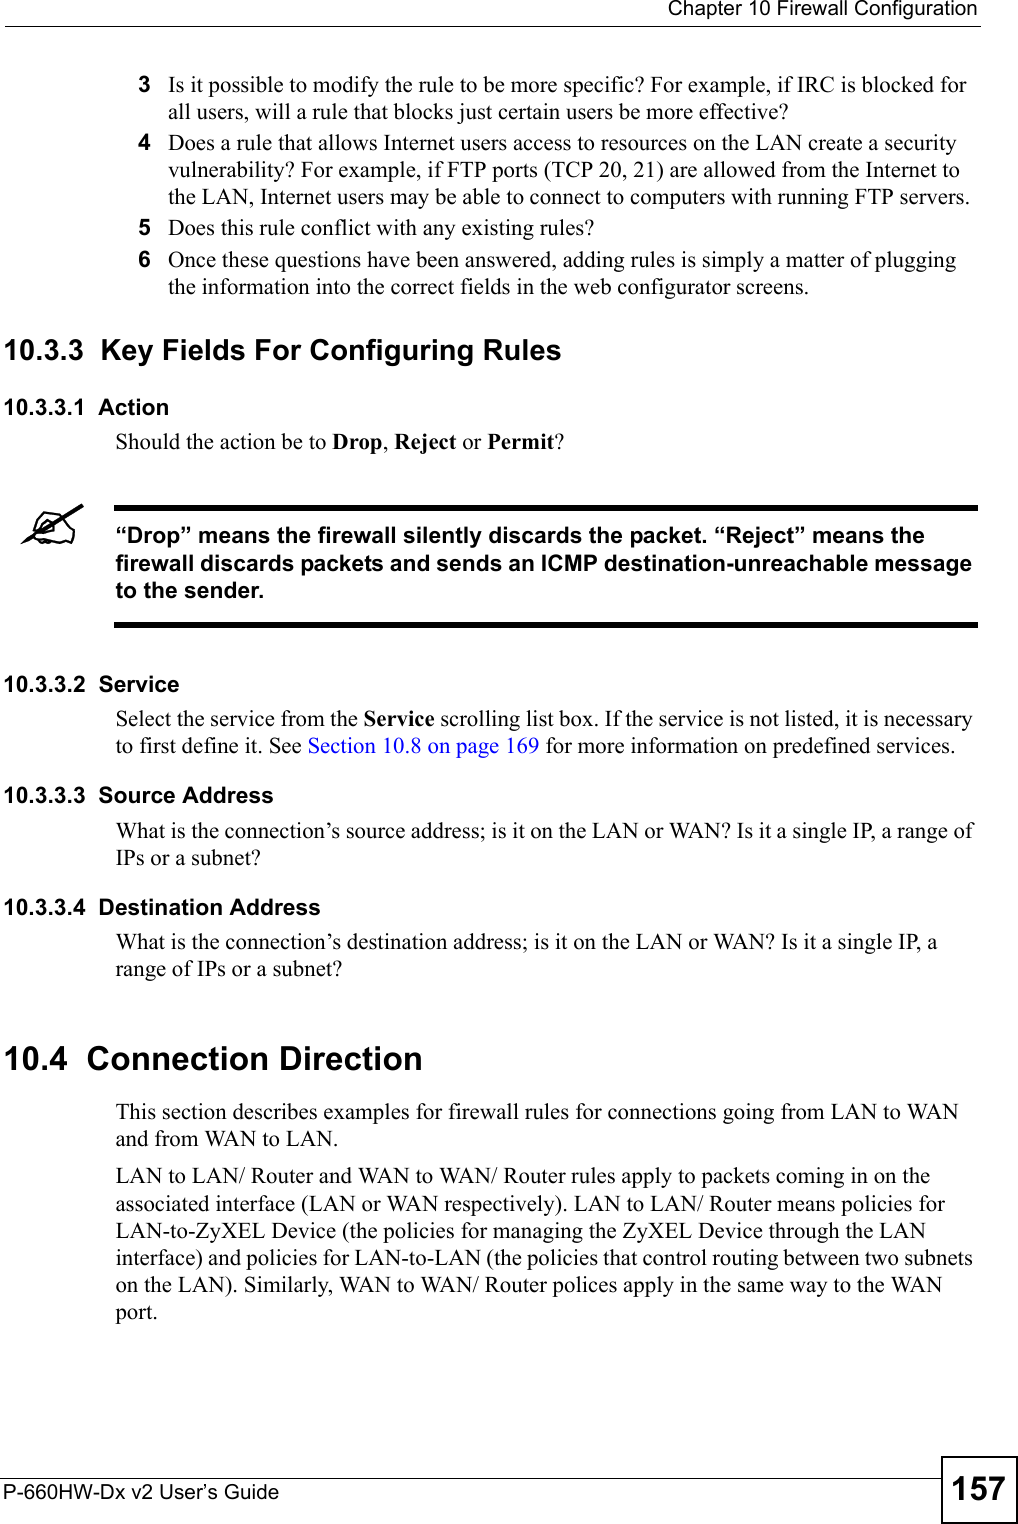  Chapter 10 Firewall ConfigurationP-660HW-Dx v2 User’s Guide 1573Is it possible to modify the rule to be more specific? For example, if IRC is blocked for all users, will a rule that blocks just certain users be more effective?4Does a rule that allows Internet users access to resources on the LAN create a security vulnerability? For example, if FTP ports (TCP 20, 21) are allowed from the Internet to the LAN, Internet users may be able to connect to computers with running FTP servers.5Does this rule conflict with any existing rules?6Once these questions have been answered, adding rules is simply a matter of plugging the information into the correct fields in the web configurator screens.10.3.3  Key Fields For Configuring Rules 10.3.3.1  ActionShould the action be to Drop, Reject or Permit? &quot;“Drop” means the firewall silently discards the packet. “Reject” means the firewall discards packets and sends an ICMP destination-unreachable message to the sender.10.3.3.2  ServiceSelect the service from the Service scrolling list box. If the service is not listed, it is necessary to first define it. See Section 10.8 on page 169 for more information on predefined services.10.3.3.3  Source AddressWhat is the connection’s source address; is it on the LAN or WAN? Is it a single IP, a range of IPs or a subnet?10.3.3.4  Destination AddressWhat is the connection’s destination address; is it on the LAN or WAN? Is it a single IP, a range of IPs or a subnet?10.4  Connection DirectionThis section describes examples for firewall rules for connections going from LAN to WAN and from WAN to LAN.LAN to LAN/ Router and WAN to WAN/ Router rules apply to packets coming in on the associated interface (LAN or WAN respectively). LAN to LAN/ Router means policies for LAN-to-ZyXEL Device (the policies for managing the ZyXEL Device through the LAN interface) and policies for LAN-to-LAN (the policies that control routing between two subnets on the LAN). Similarly, WAN to WAN/ Router polices apply in the same way to the WAN port.